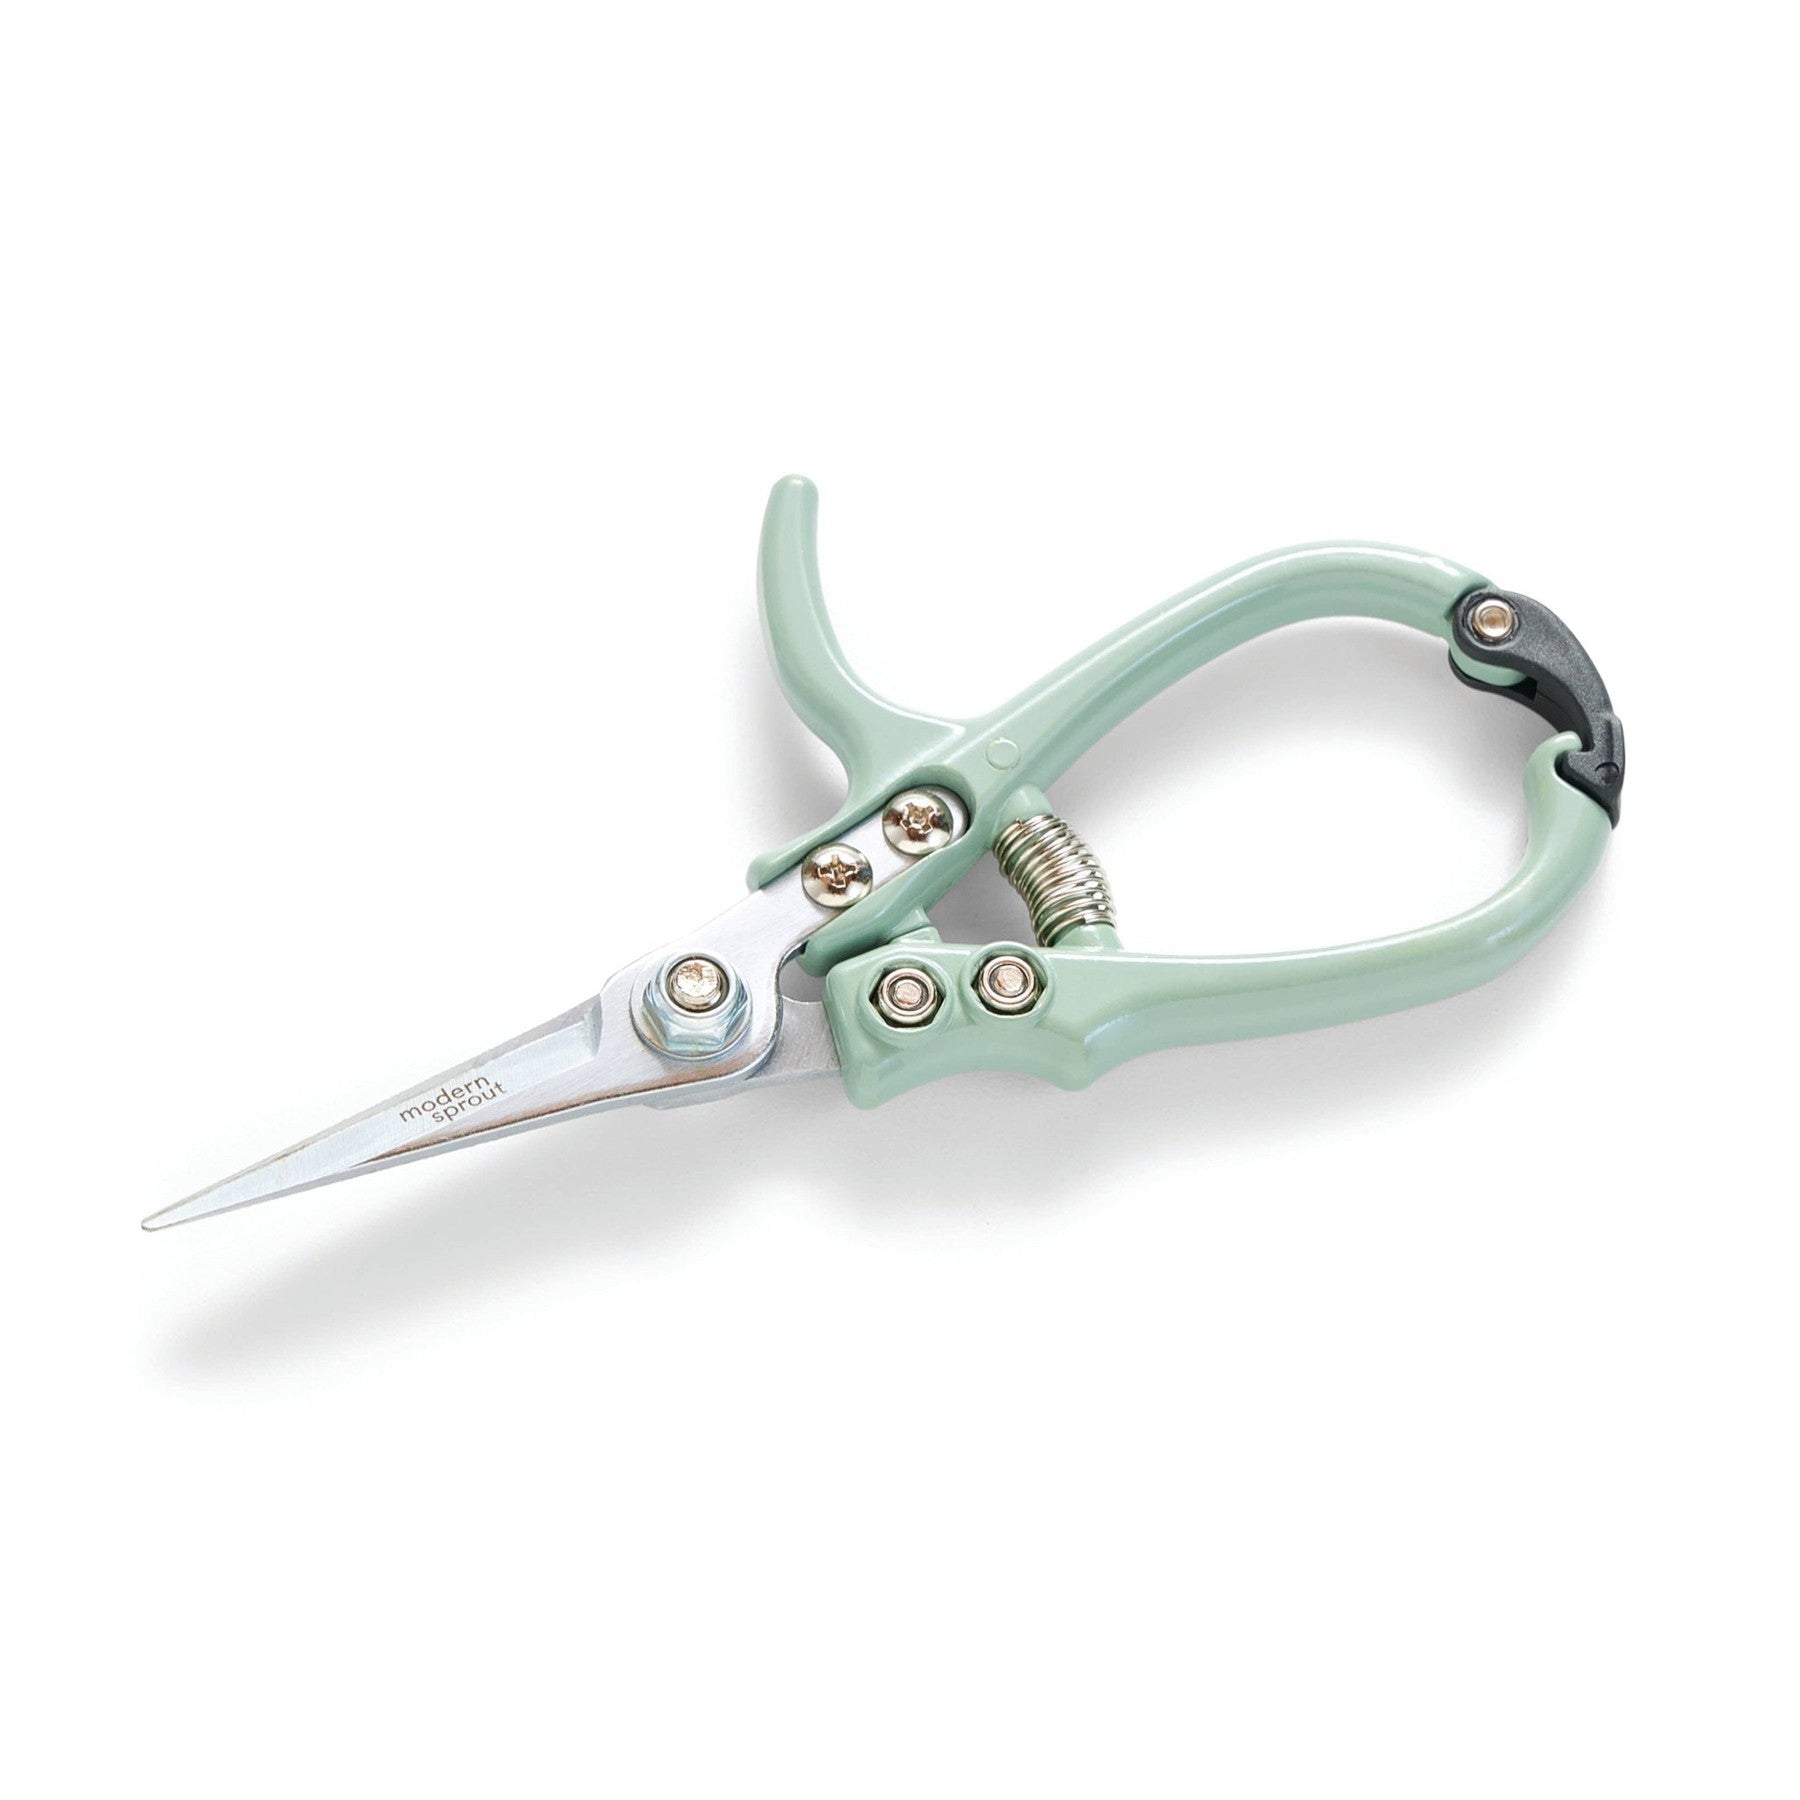 Grip-Friendly Gardening Shears-Gardening Tools-The Succulent Source